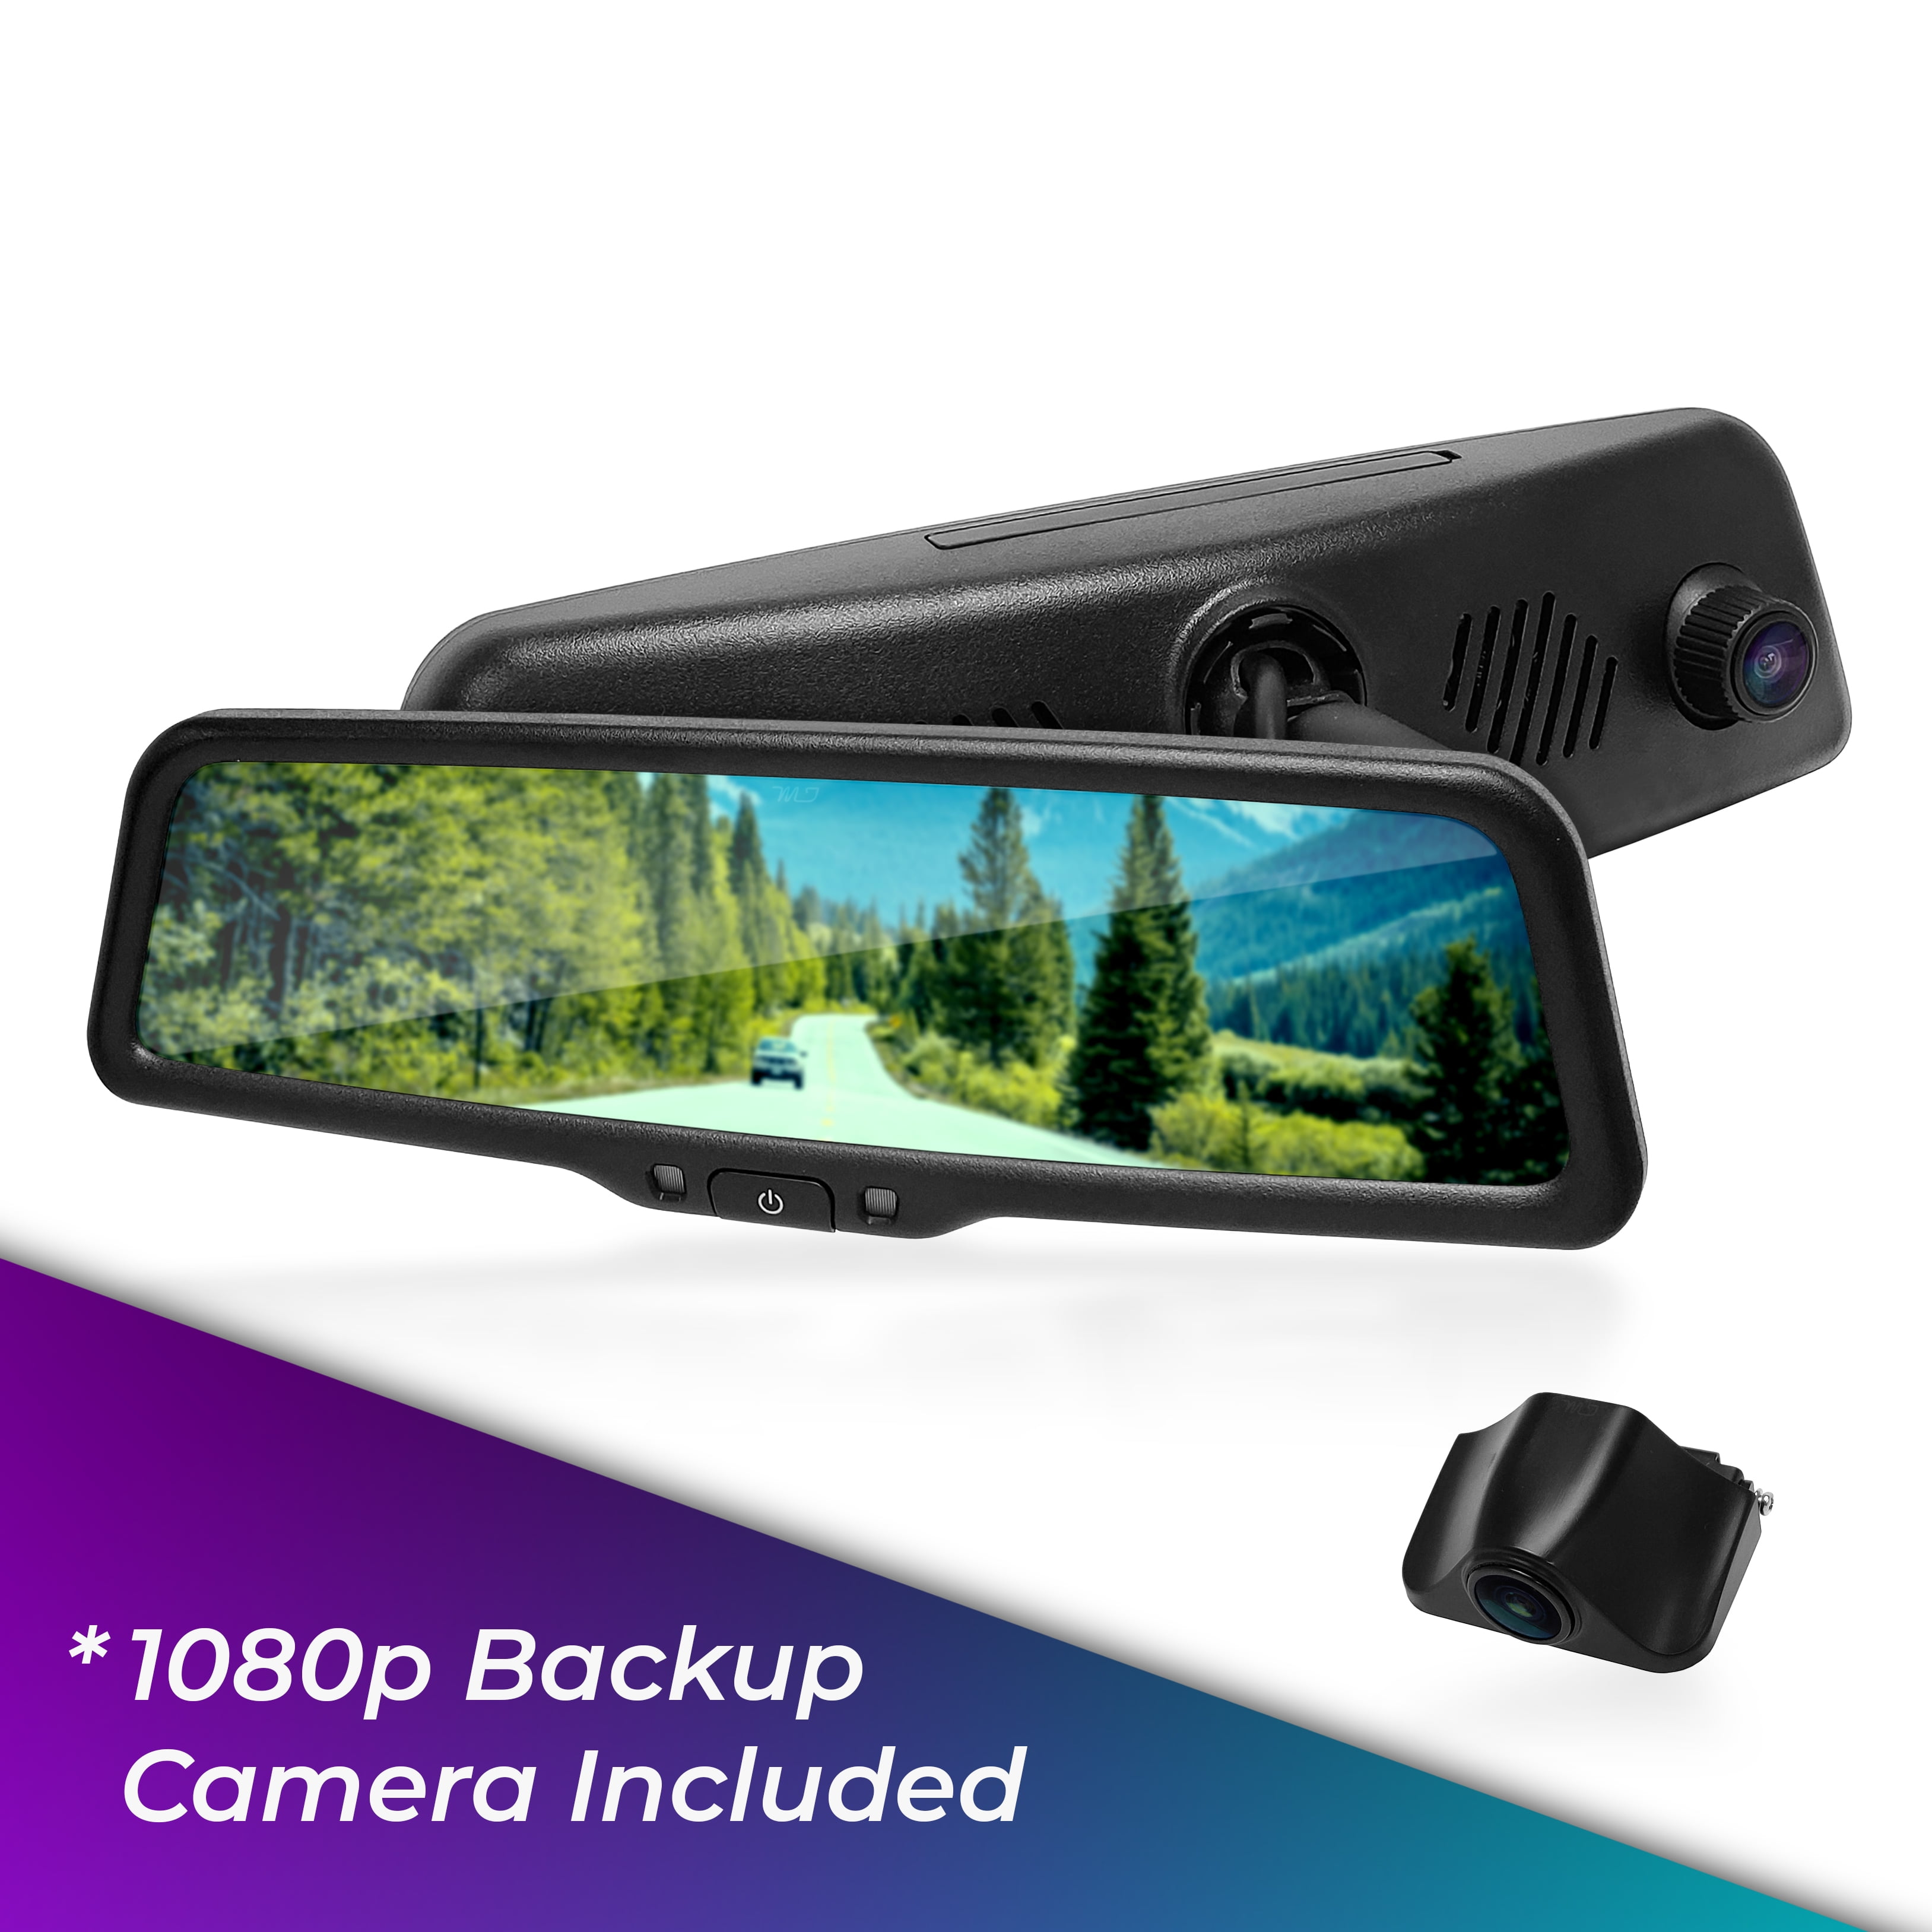 Wi-Fi Mobile Playback 1080p Backup Camera Superior Night Mode G-Sensor Master Tailgaters 10” IPS LCD Rear View Mirror with 1080p DVR 140° Built-in Dash Cam Parking Mode